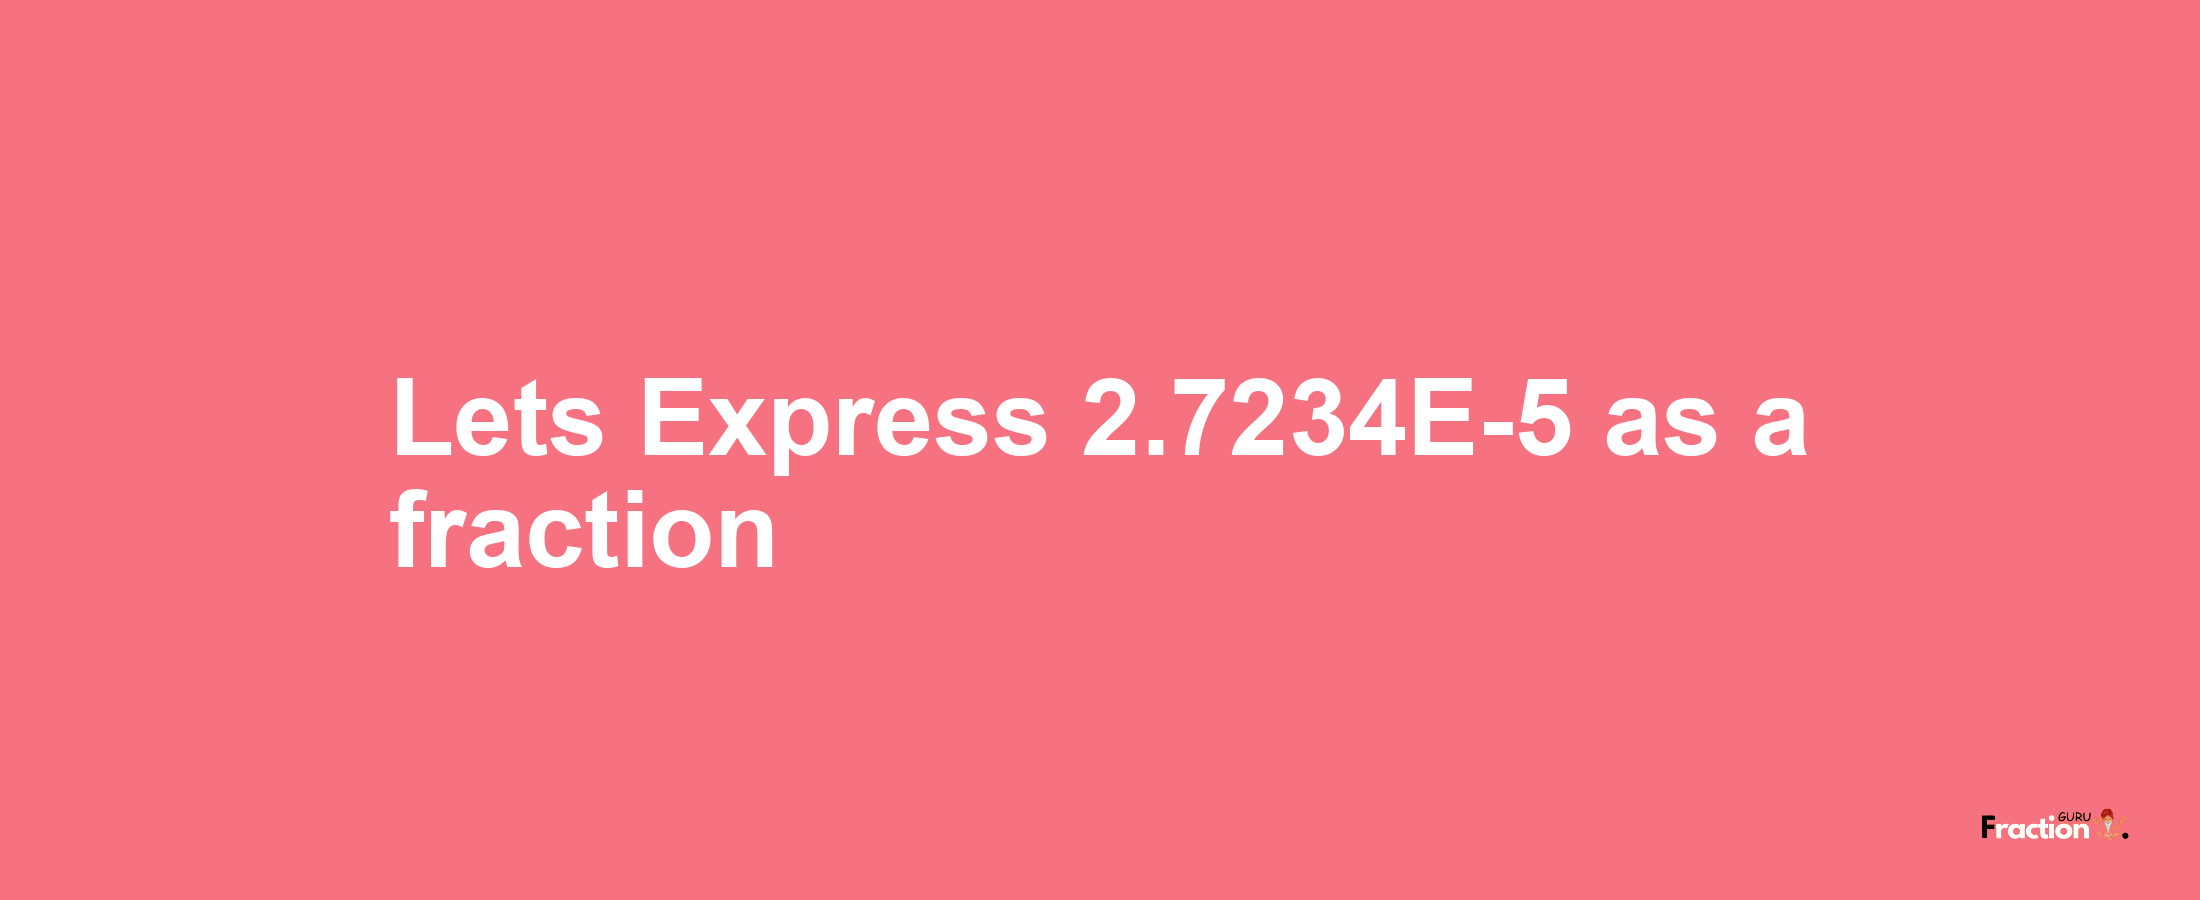 Lets Express 2.7234E-5 as afraction